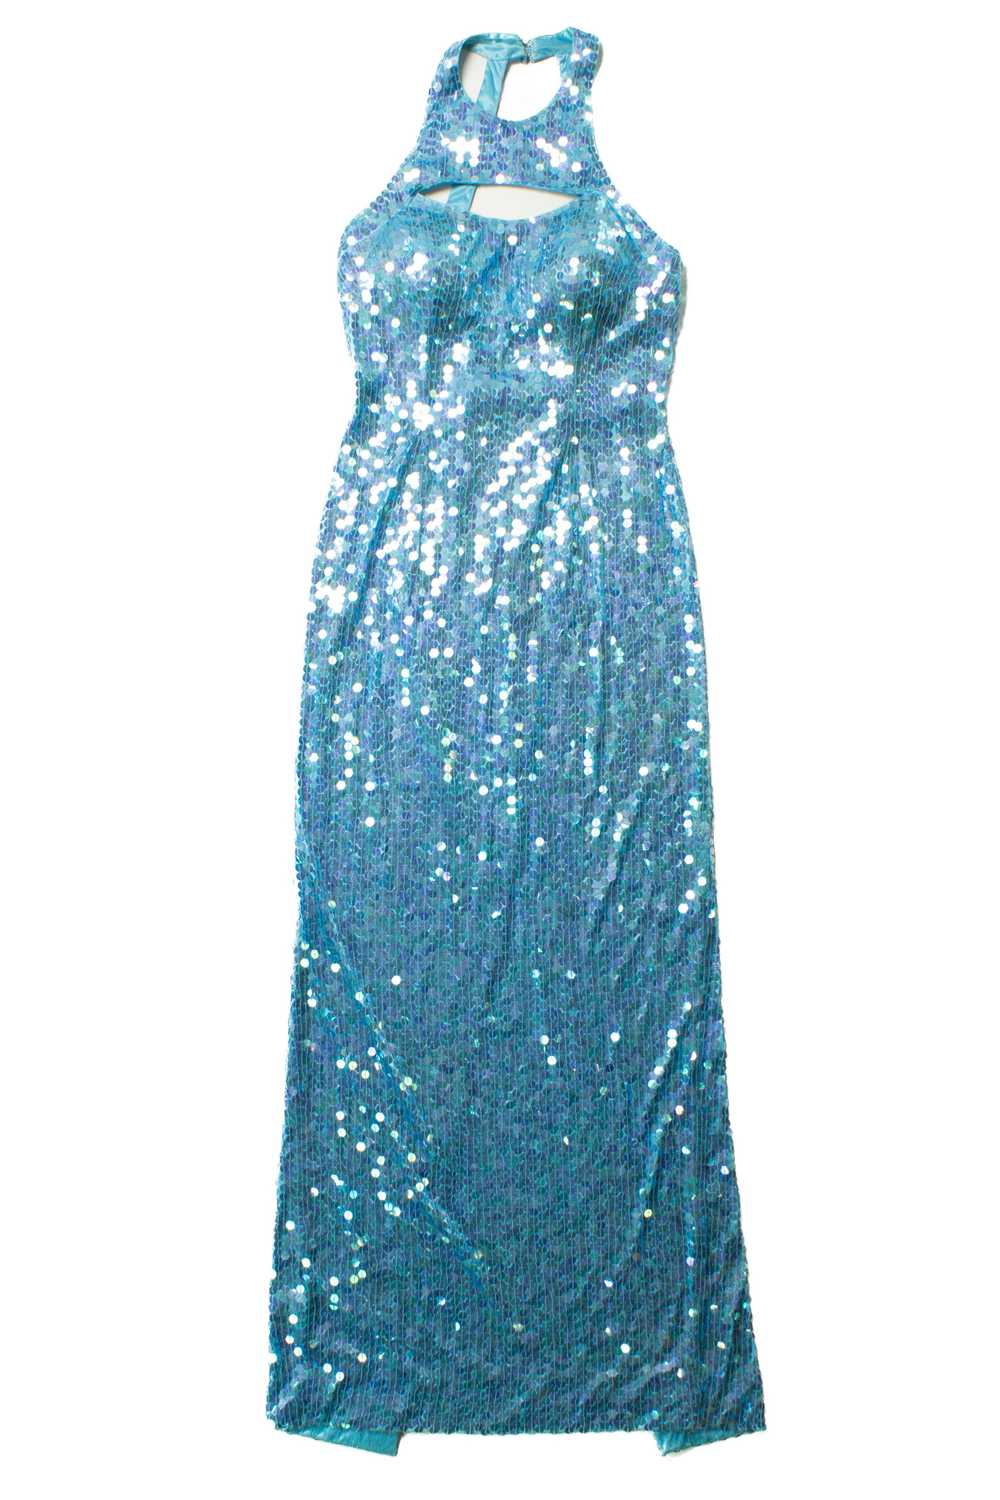 Vintage Adrianna Papell Blue Sequin Dress - image 6